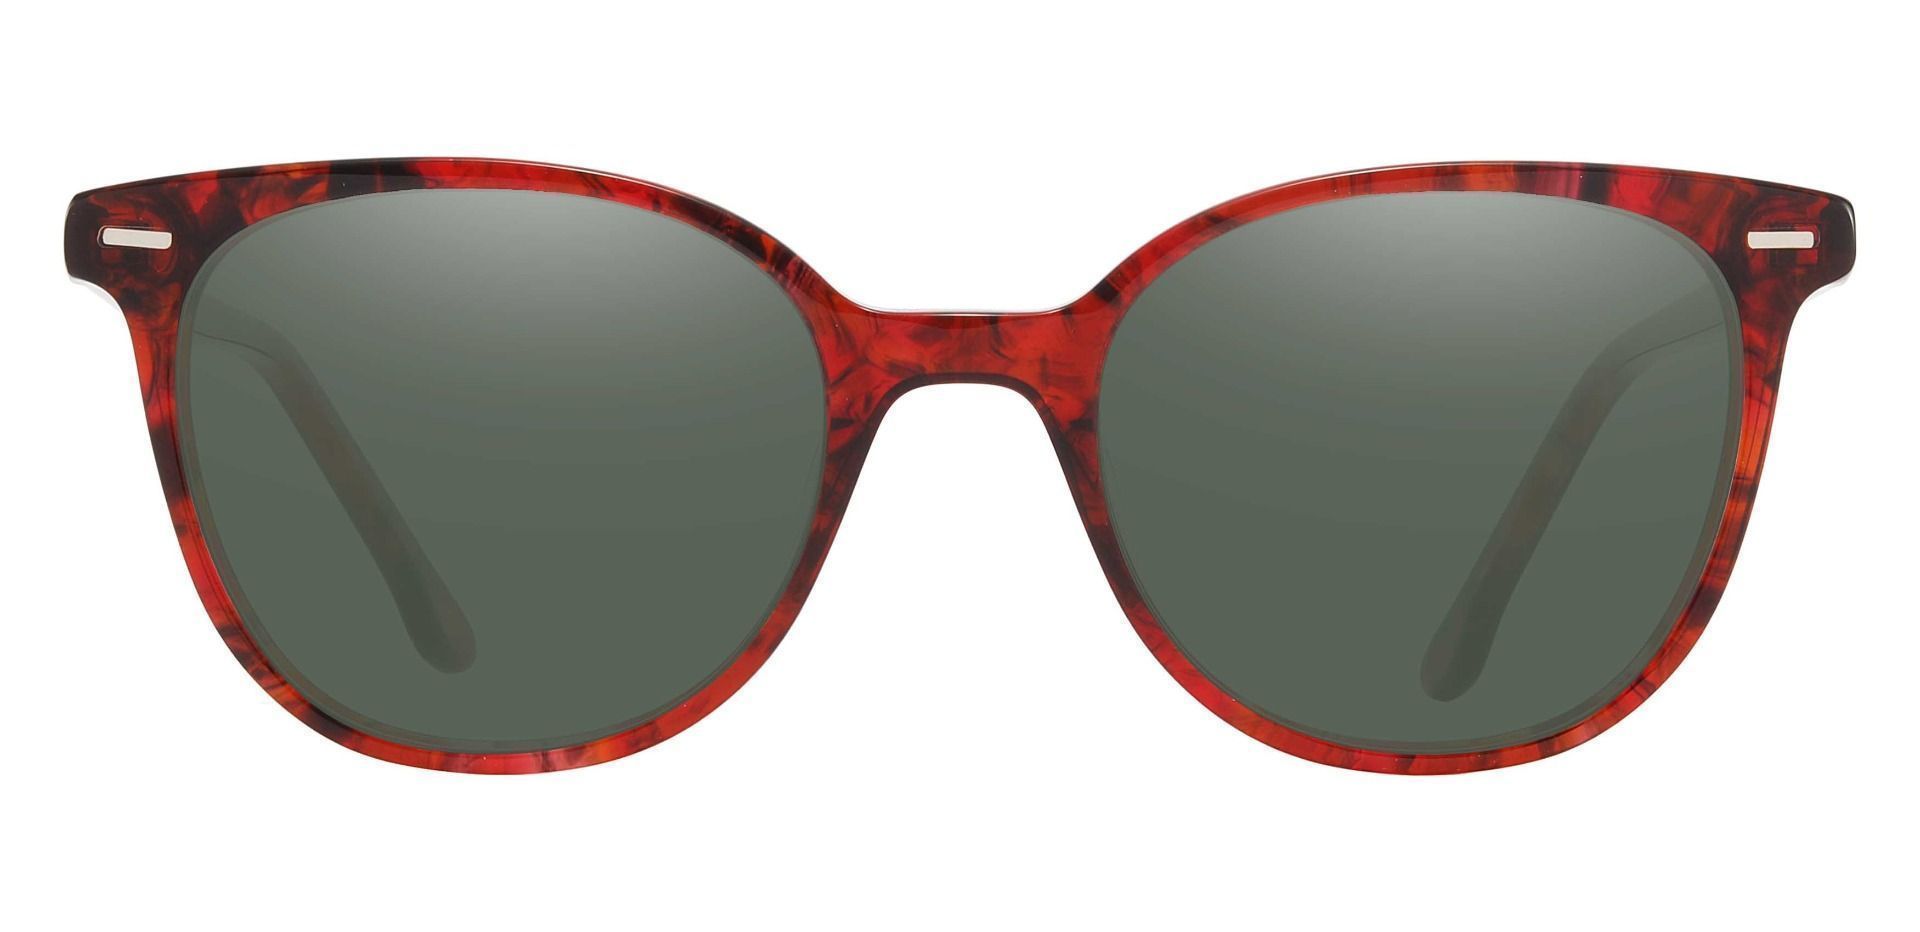 Chili Oval Prescription Sunglasses - Red Frame With Green Lenses